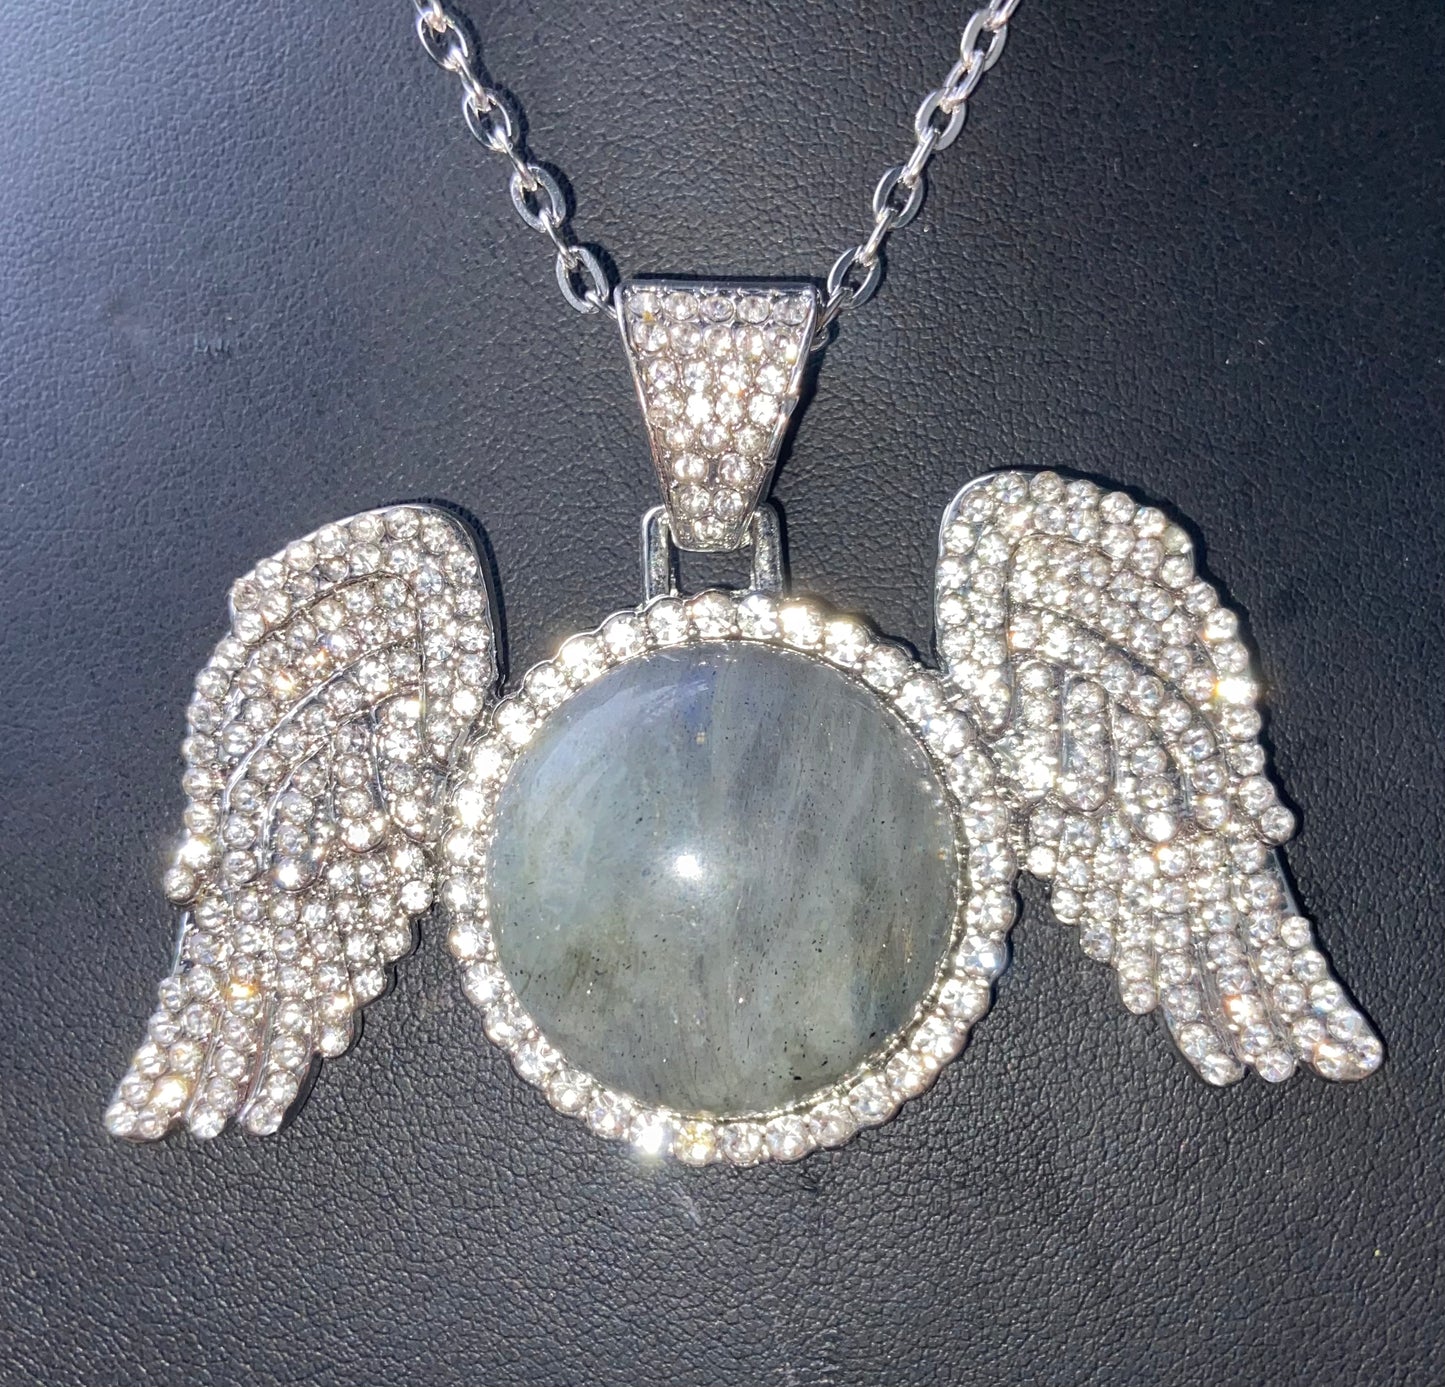 Crystal wing necklace